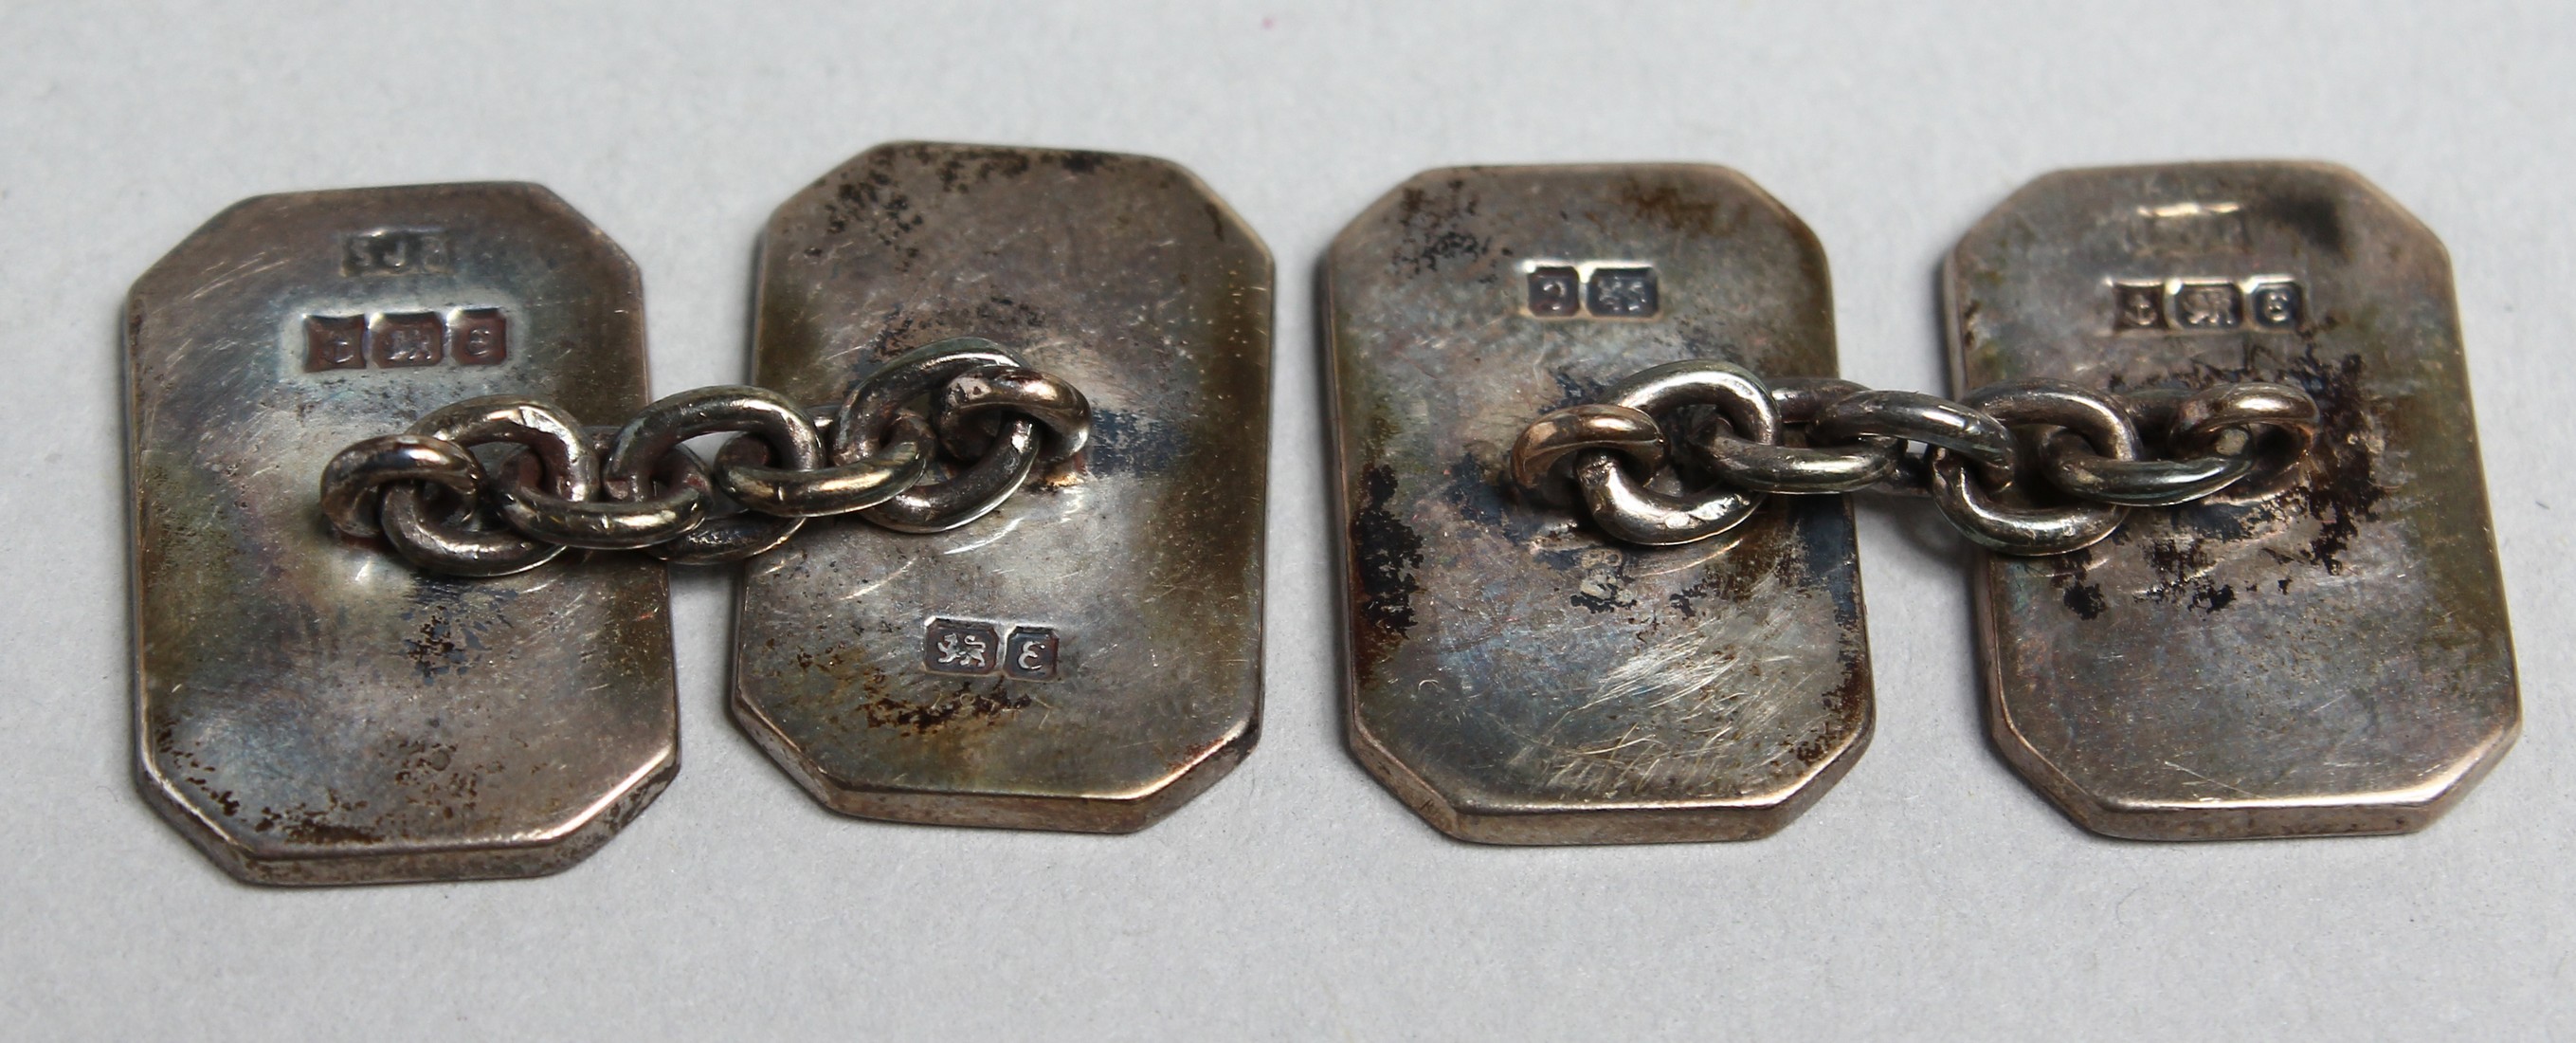 A PAIR OF ASPREY’S SILVER CUFF LINKS. - Image 2 of 4